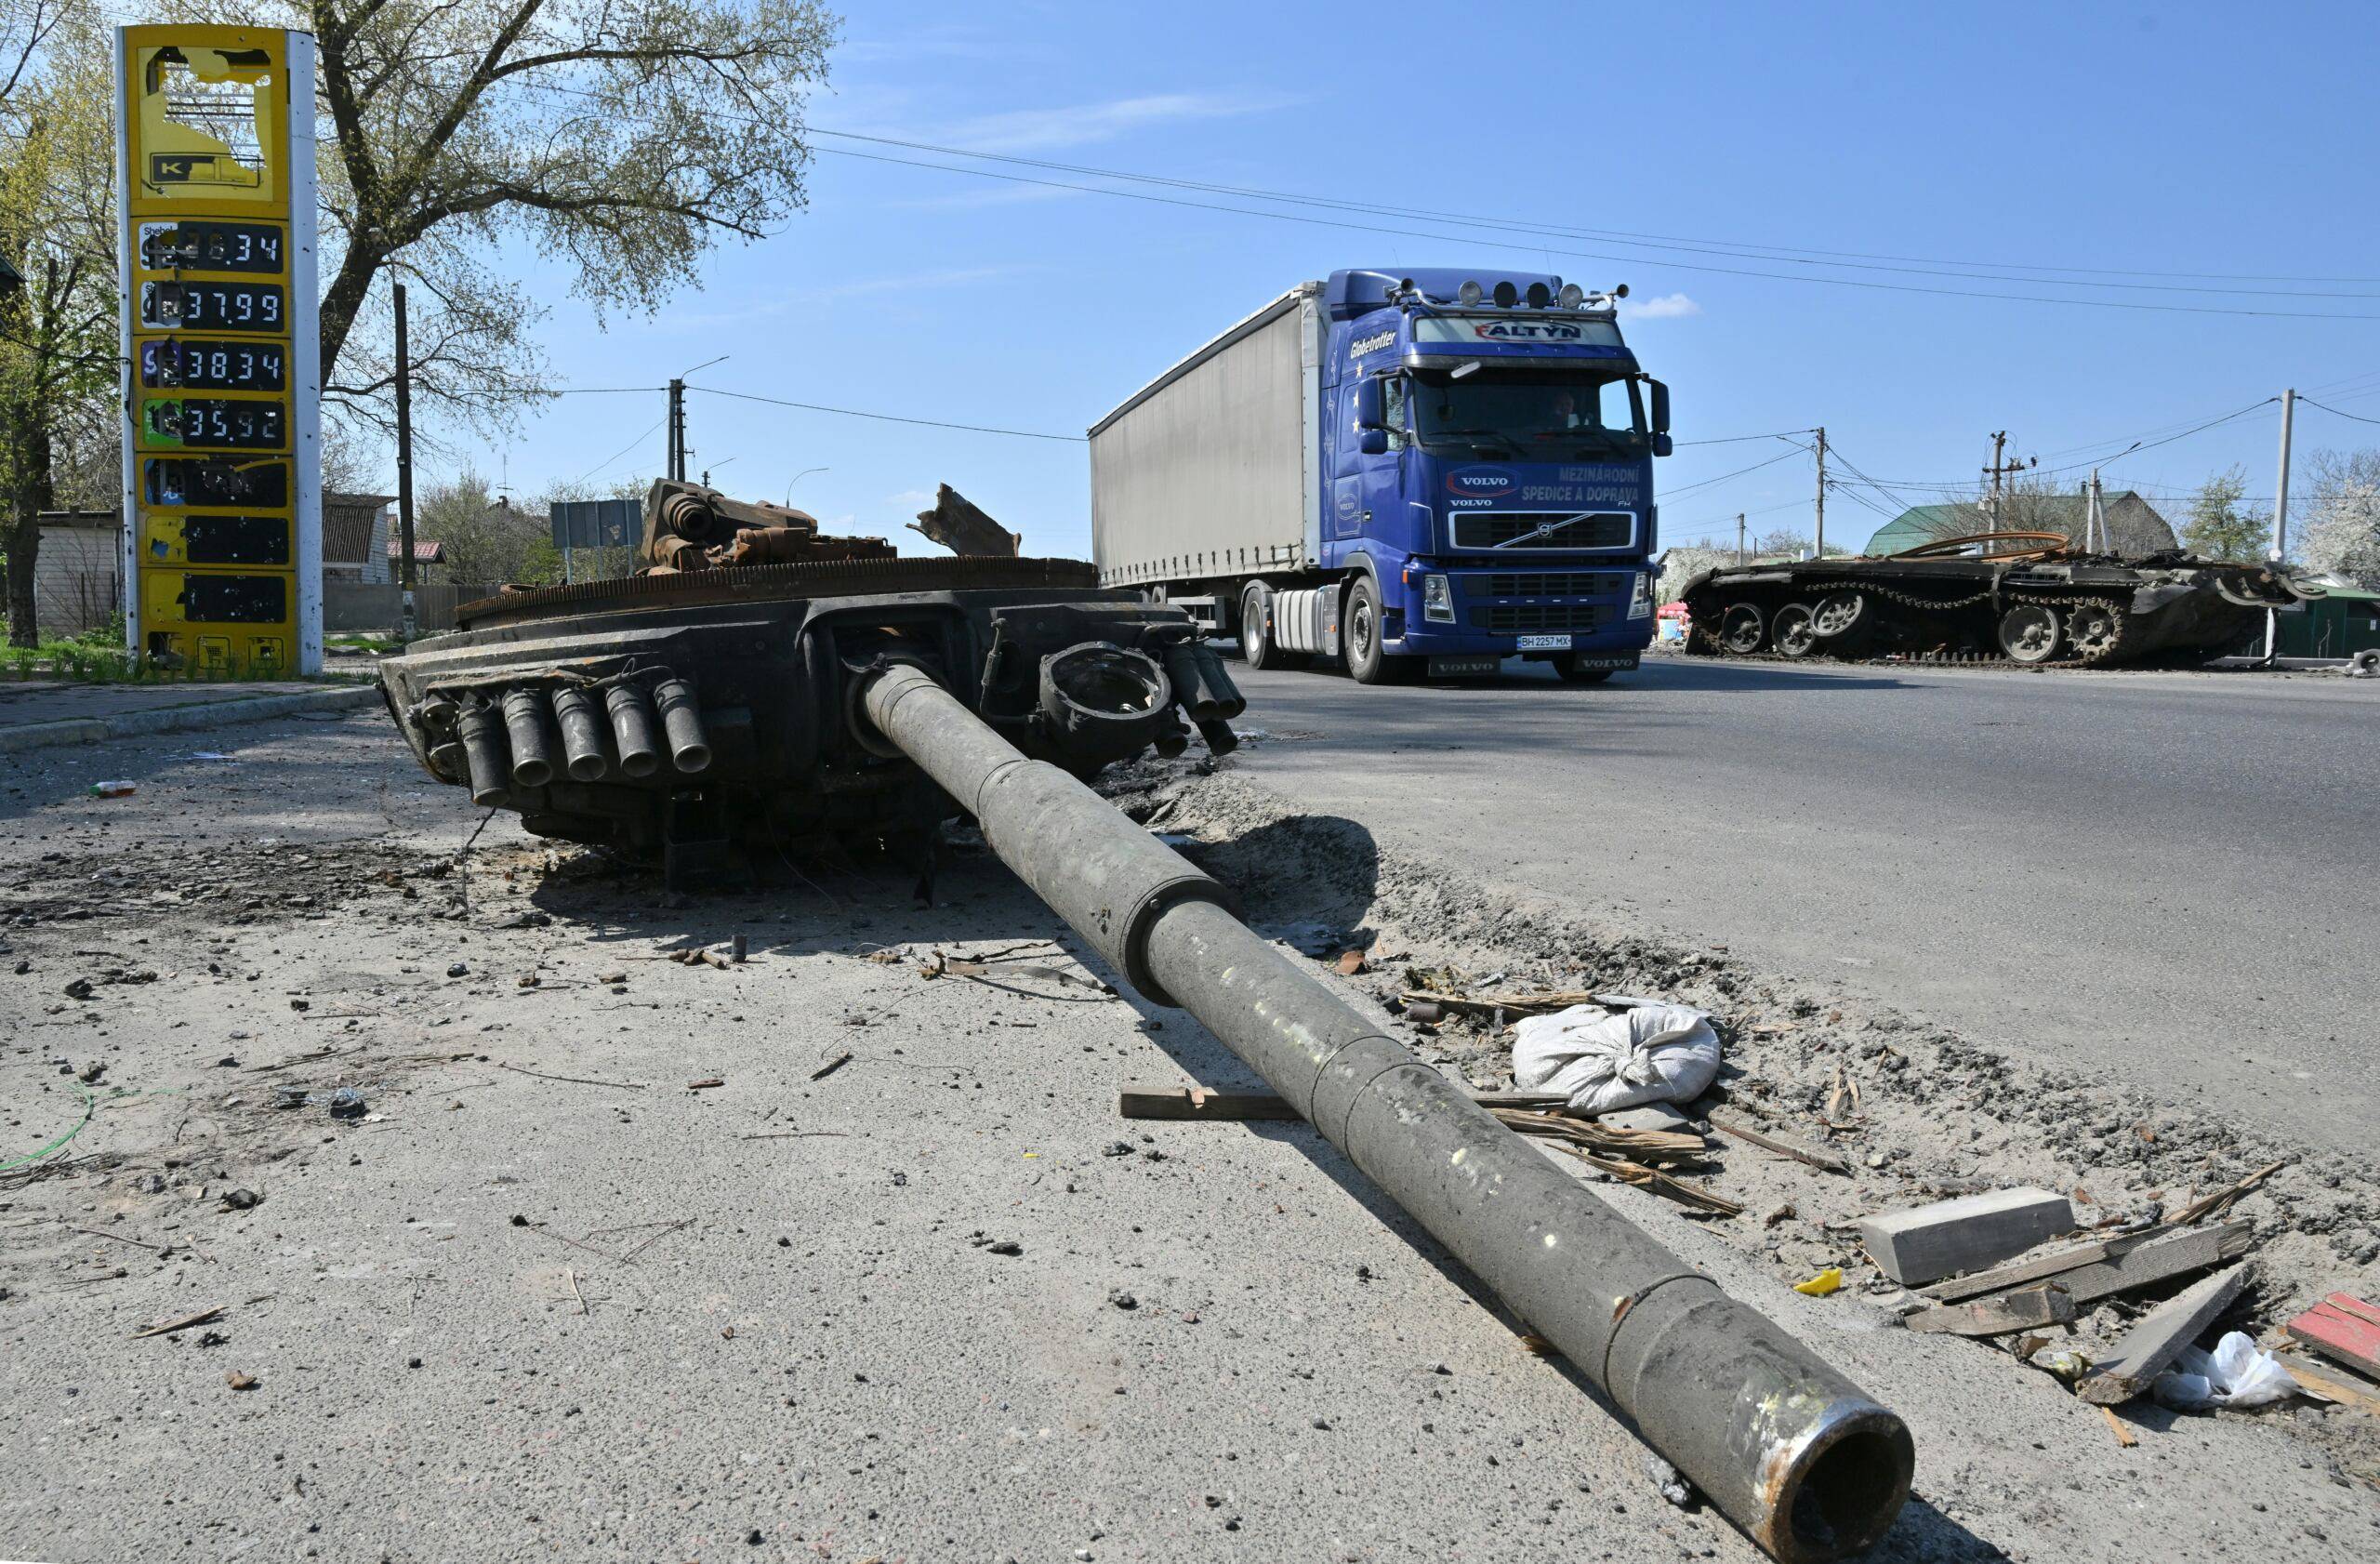 A truck drive past a wreckage of a Russian tank next to a destroyed petrol station in Skybyn village, northeastern Ukrainian capital of Kyiv on May 2, 2022. - The snaking queues of cars that returned to many Ukrainian roads last week showcase the success of Russia's seeming effort to inflict as much pain on its western neighbour as possible. (Photo by Sergei SUPINSKY / AFP)